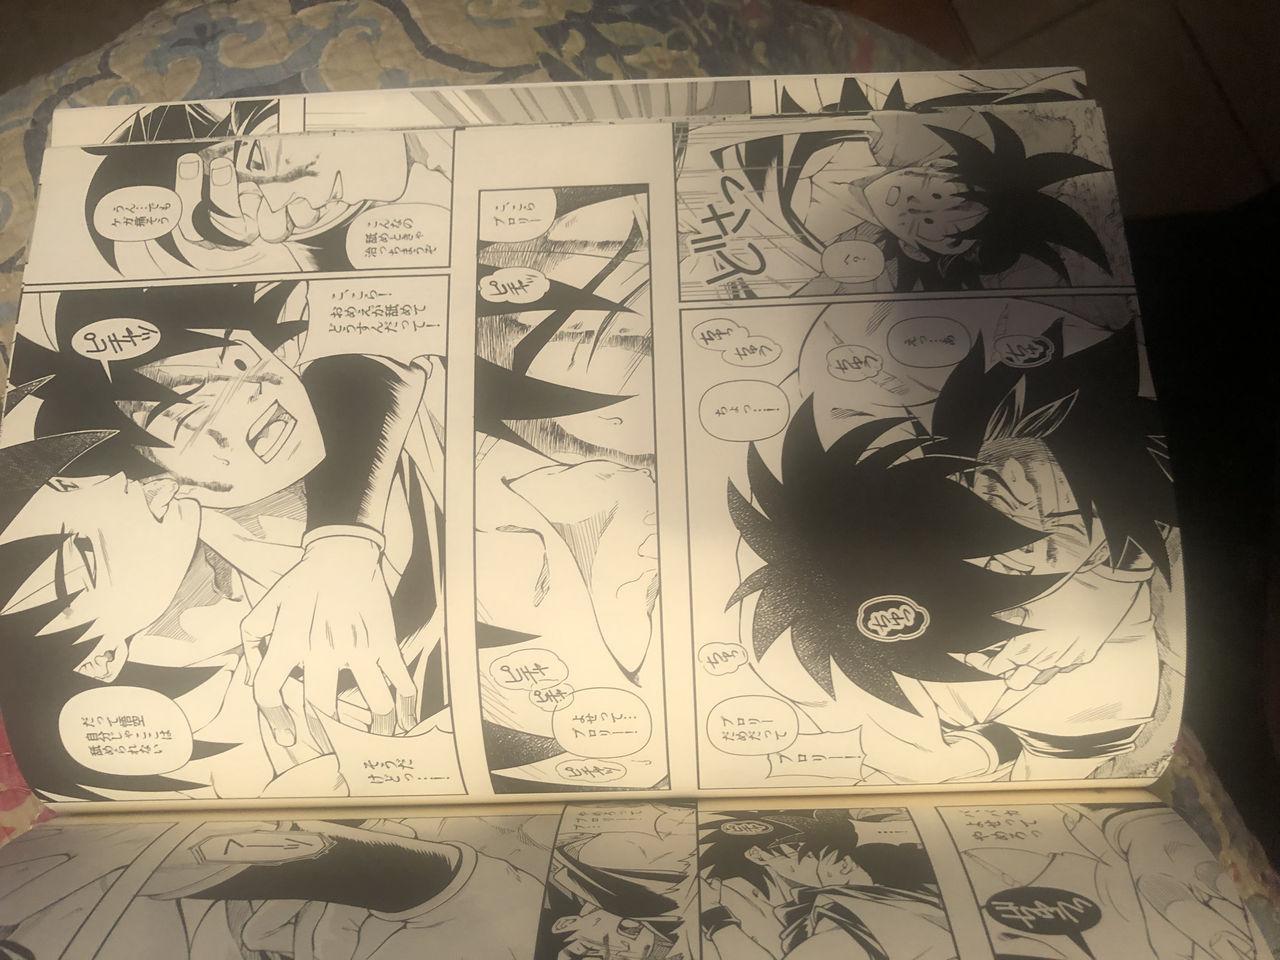 Atm Broly - Dragon ball super Groupsex - Page 10